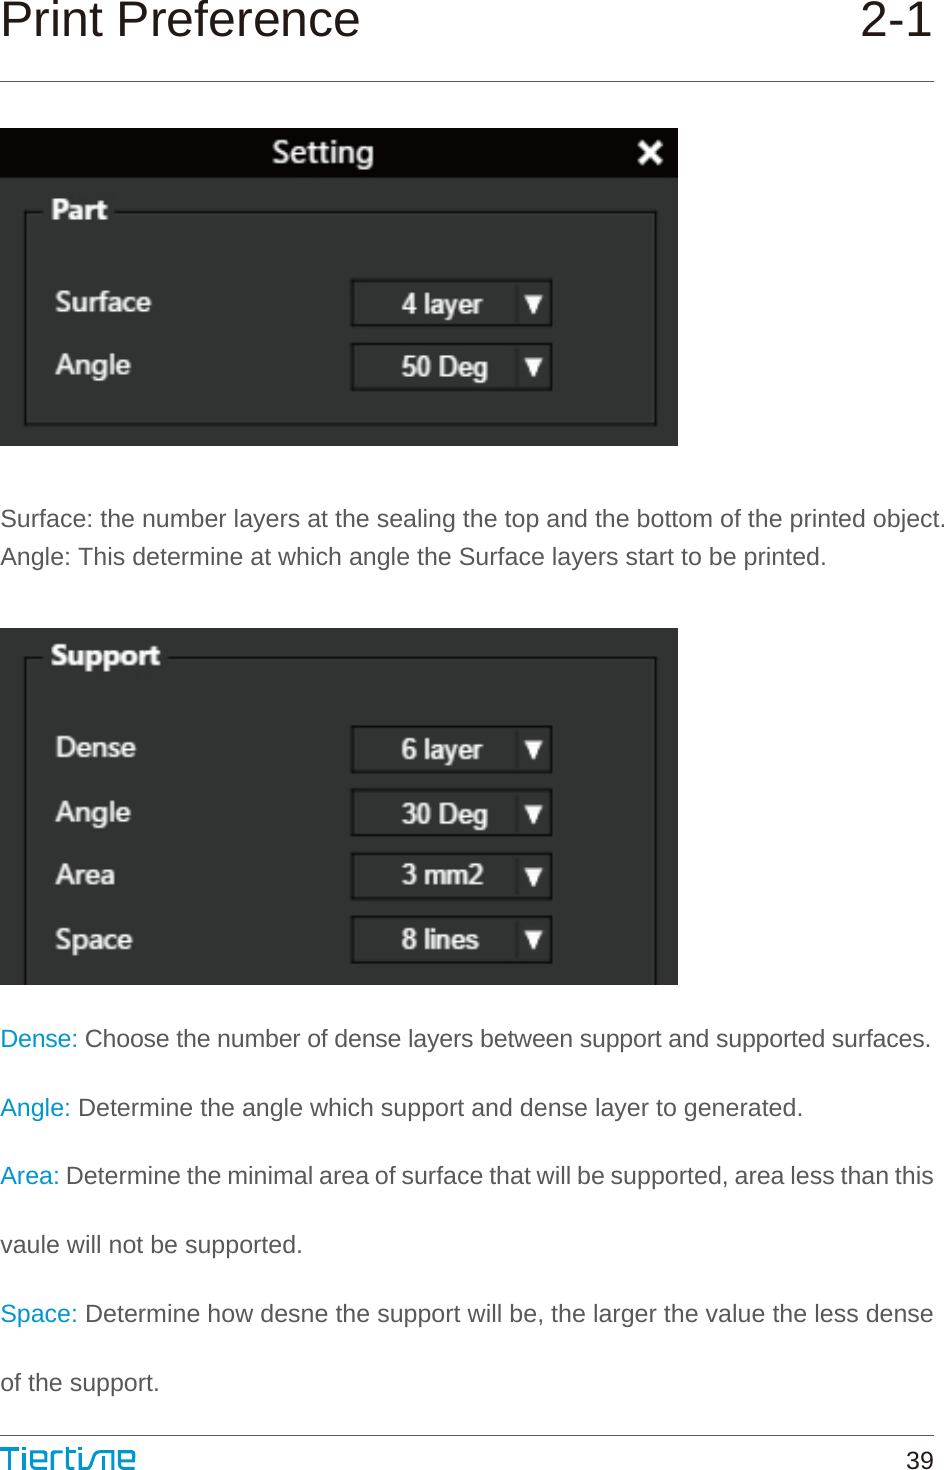 Print PreferenceSurface: the number layers at the sealing the top and the bottom of the printed object.Angle: This determine at which angle the Surface layers start to be printed.Dense: Choose the number of dense layers between support and supported surfaces.Angle: Determine the angle which support and dense layer to generated.Area: Determine the minimal area of surface that will be supported, area less than this vaule will not be supported.Space: Determine how desne the support will be, the larger the value the less dense of the support.2-139